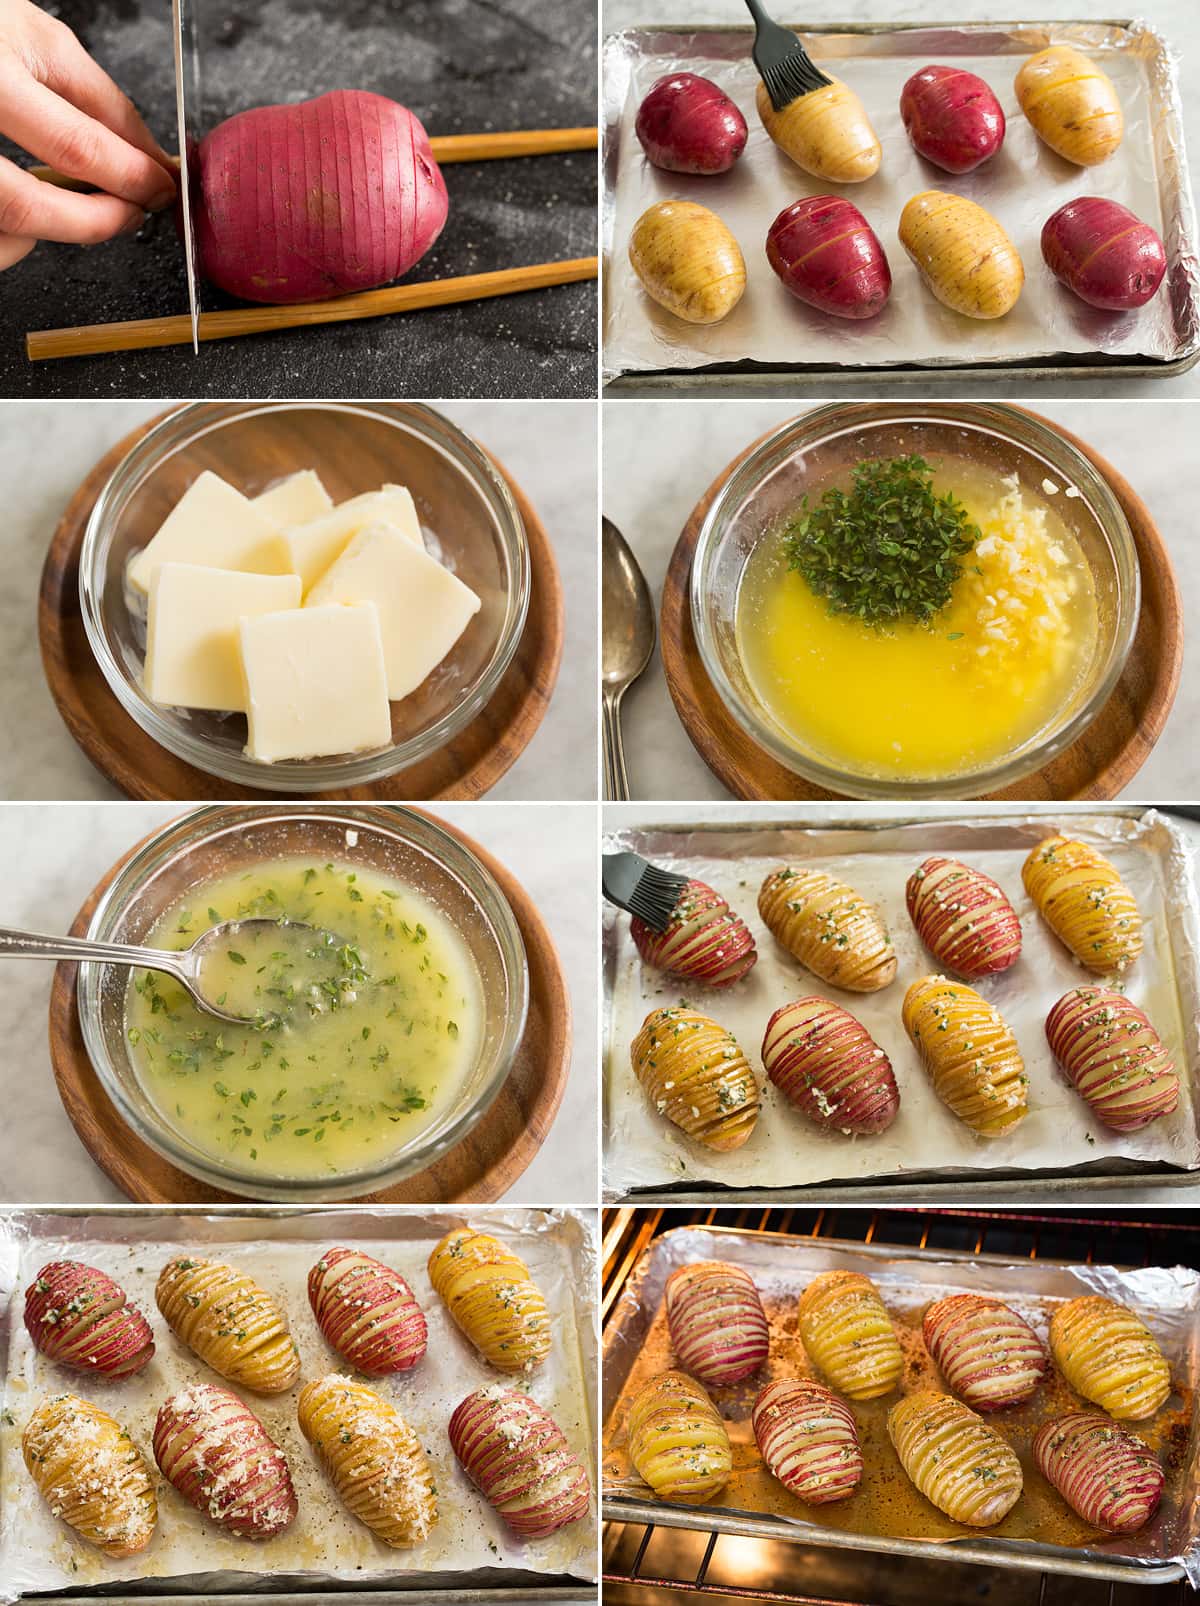 Collage of eight photos showing how to make and bake hasselback potatoes.